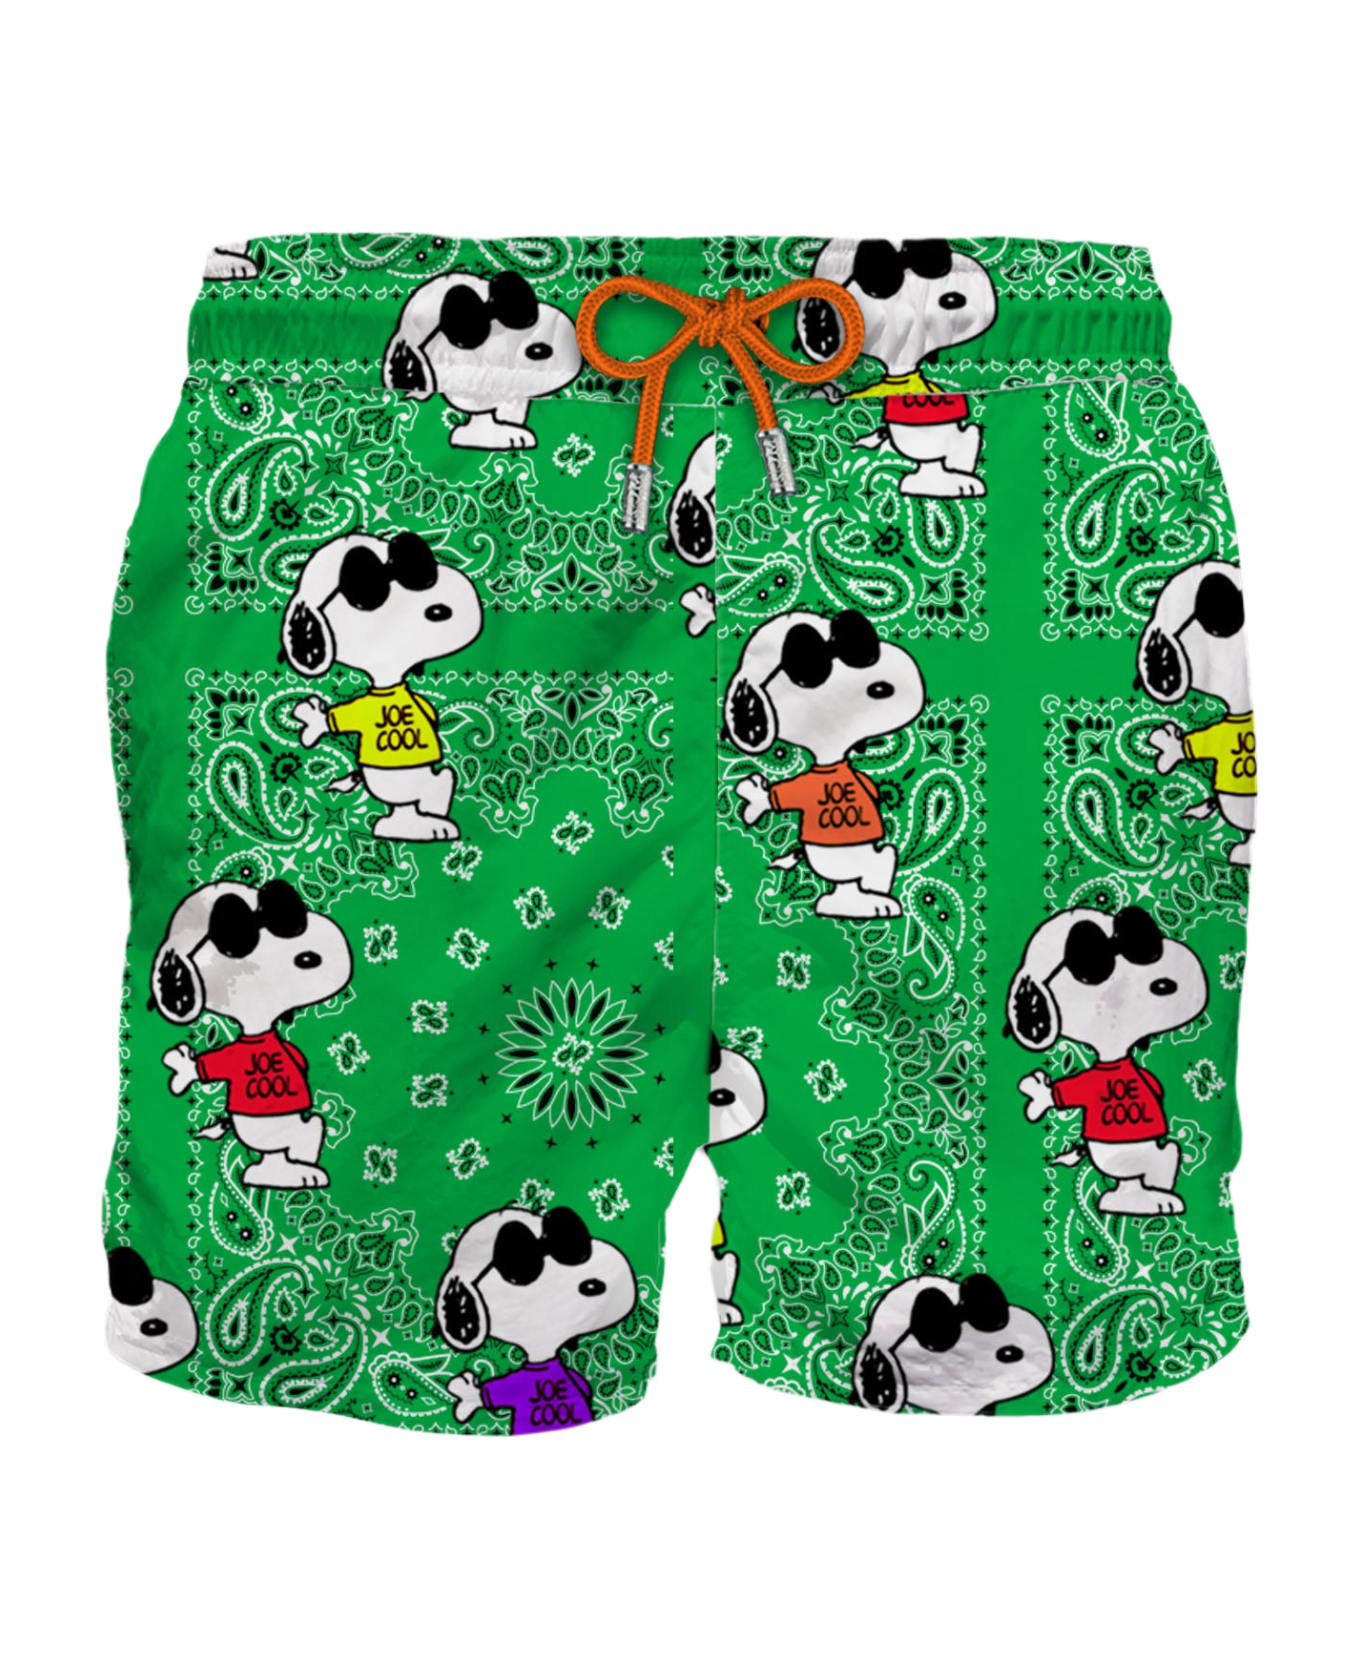 MC2 Saint Barth Man Classic Swim Shorts With Snoopy On Green Bandanna Pattern | Snoopy - Peanuts Special Edition - GREEN